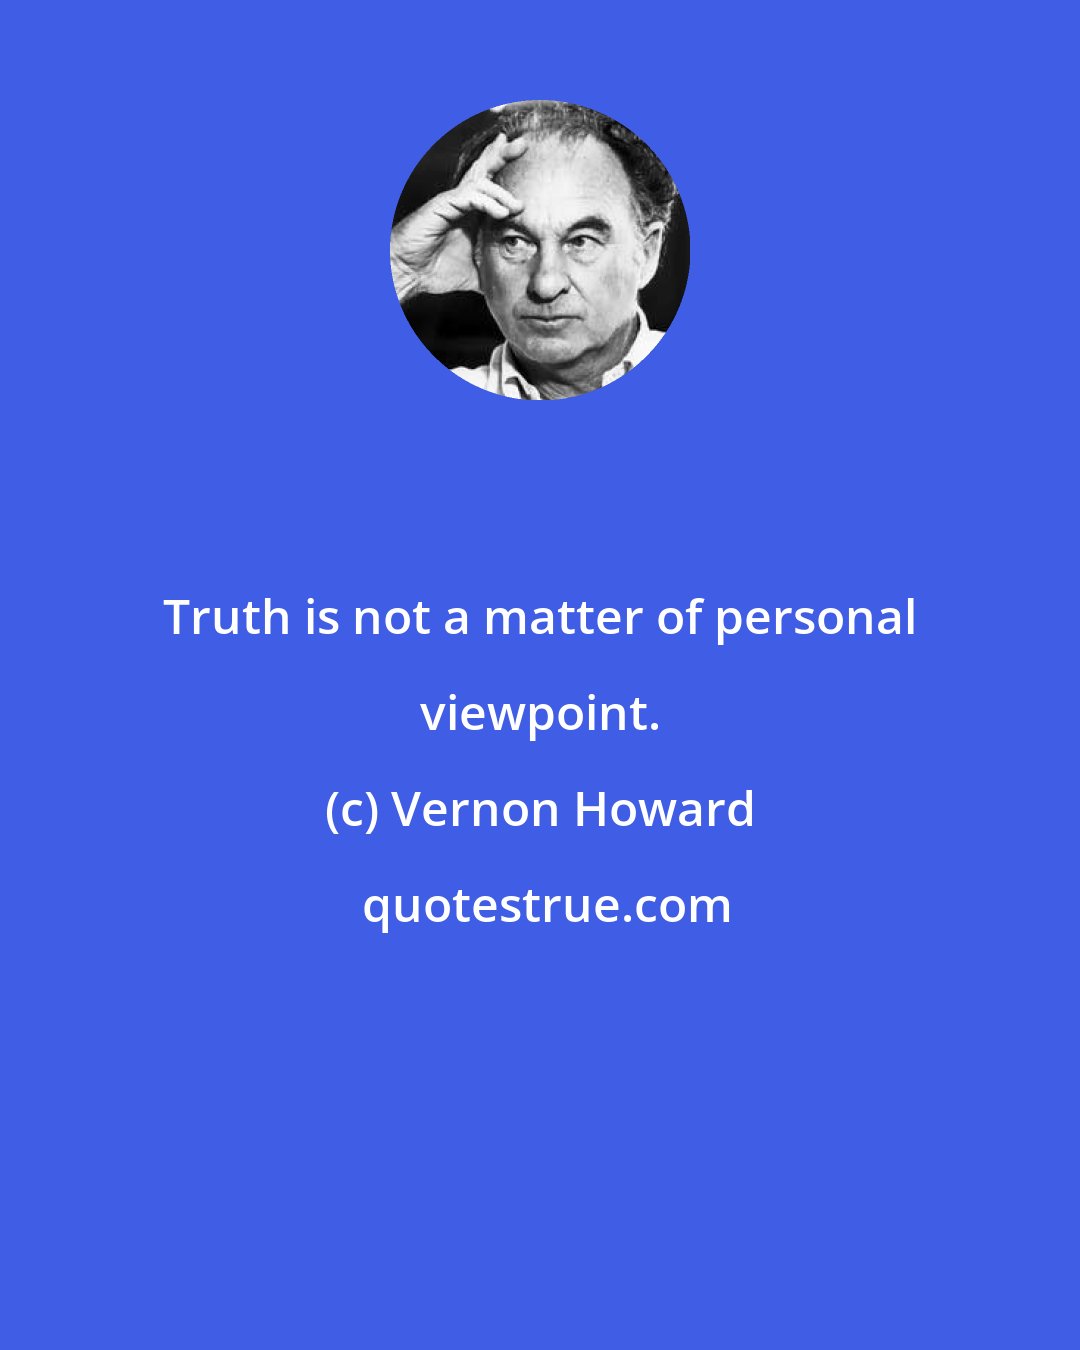 Vernon Howard: Truth is not a matter of personal viewpoint.